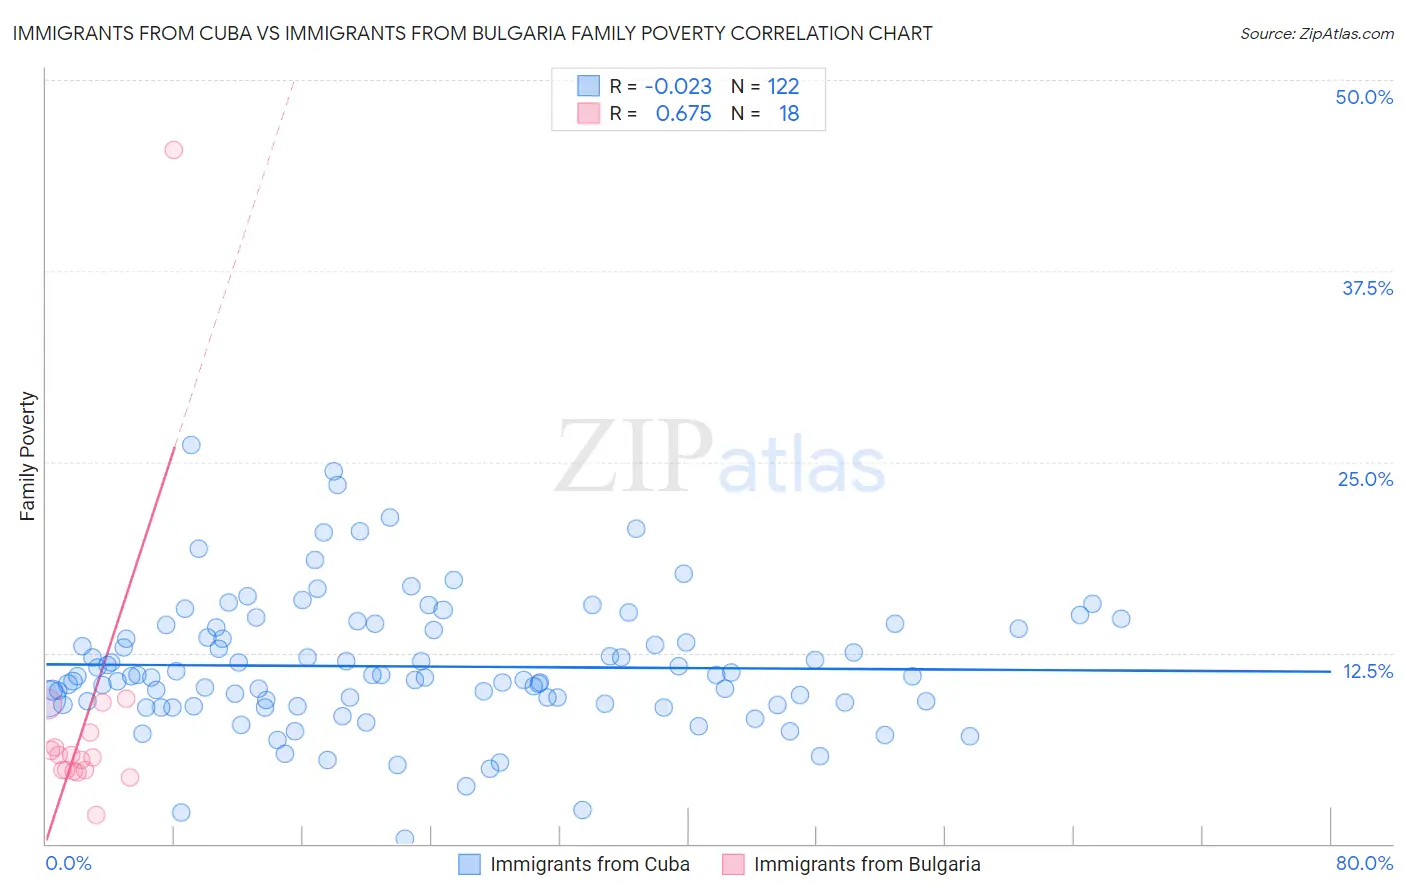 Immigrants from Cuba vs Immigrants from Bulgaria Family Poverty